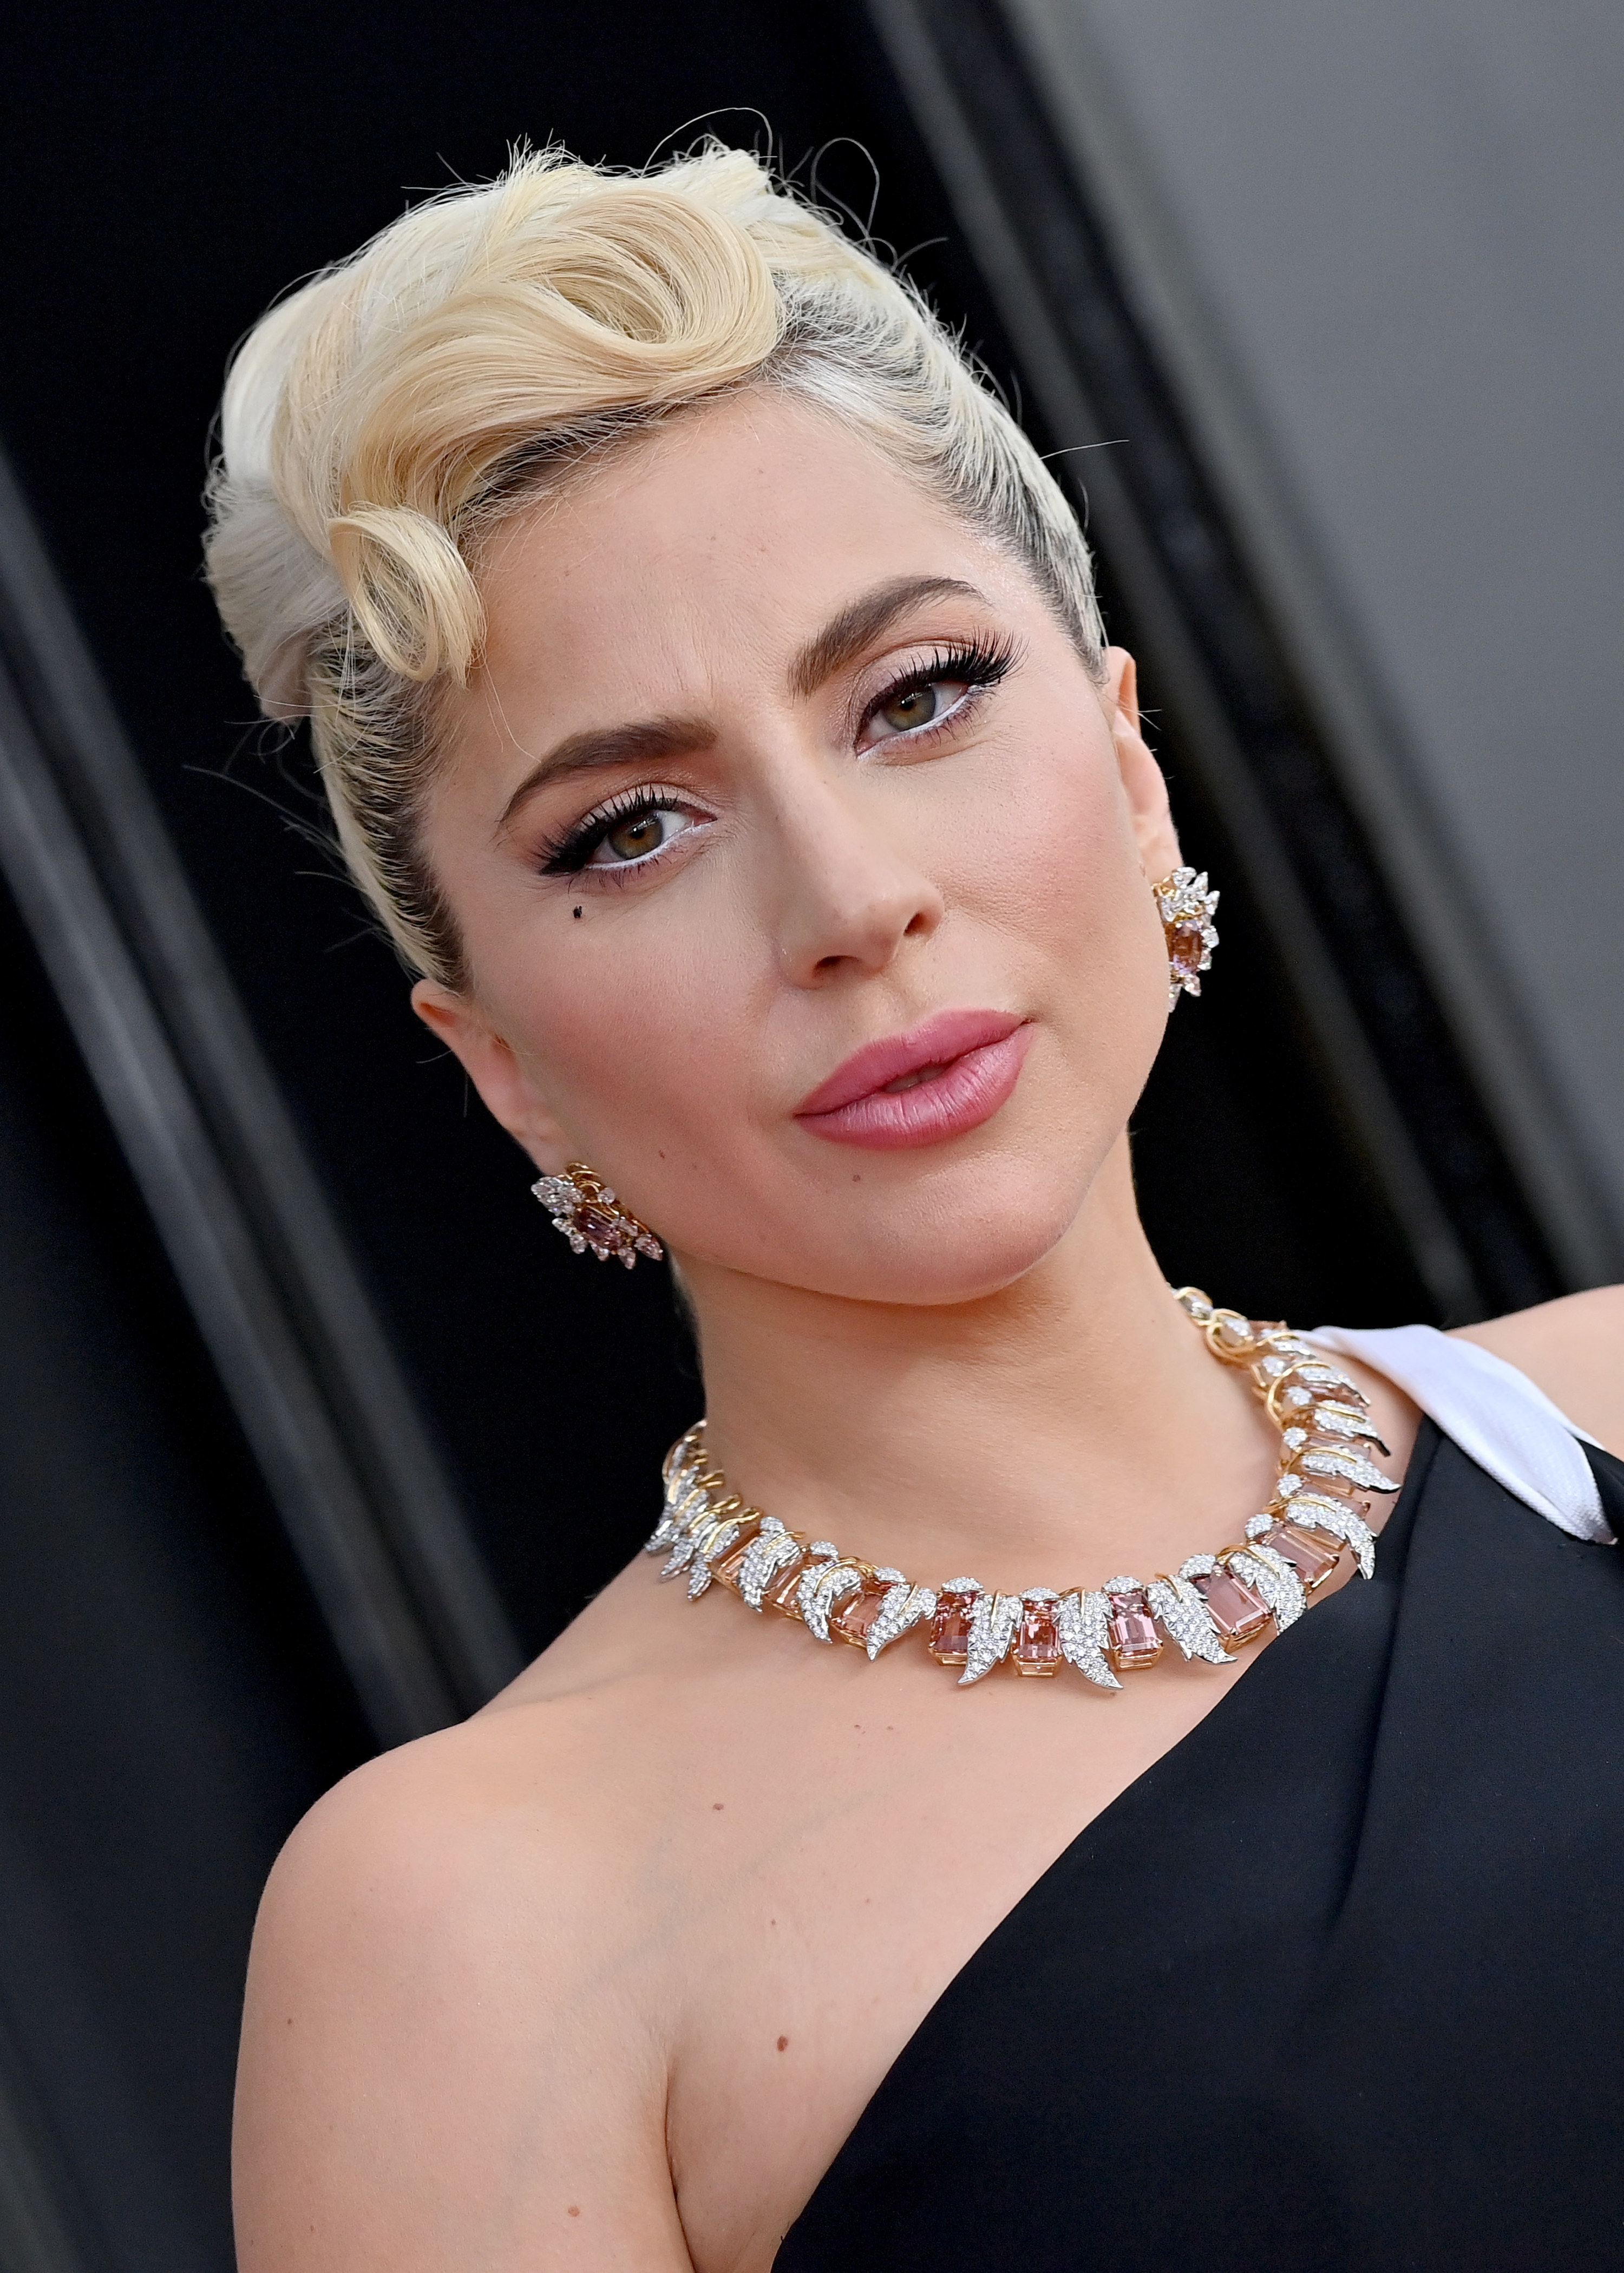 Head and shoulders shot of Lady Gaga smiling, her blonde hair swept up in a tight bun and her eye make up accentuating her eyes with white liner and black lashes. She wear chunky jewelled earrings and a matching necklace.